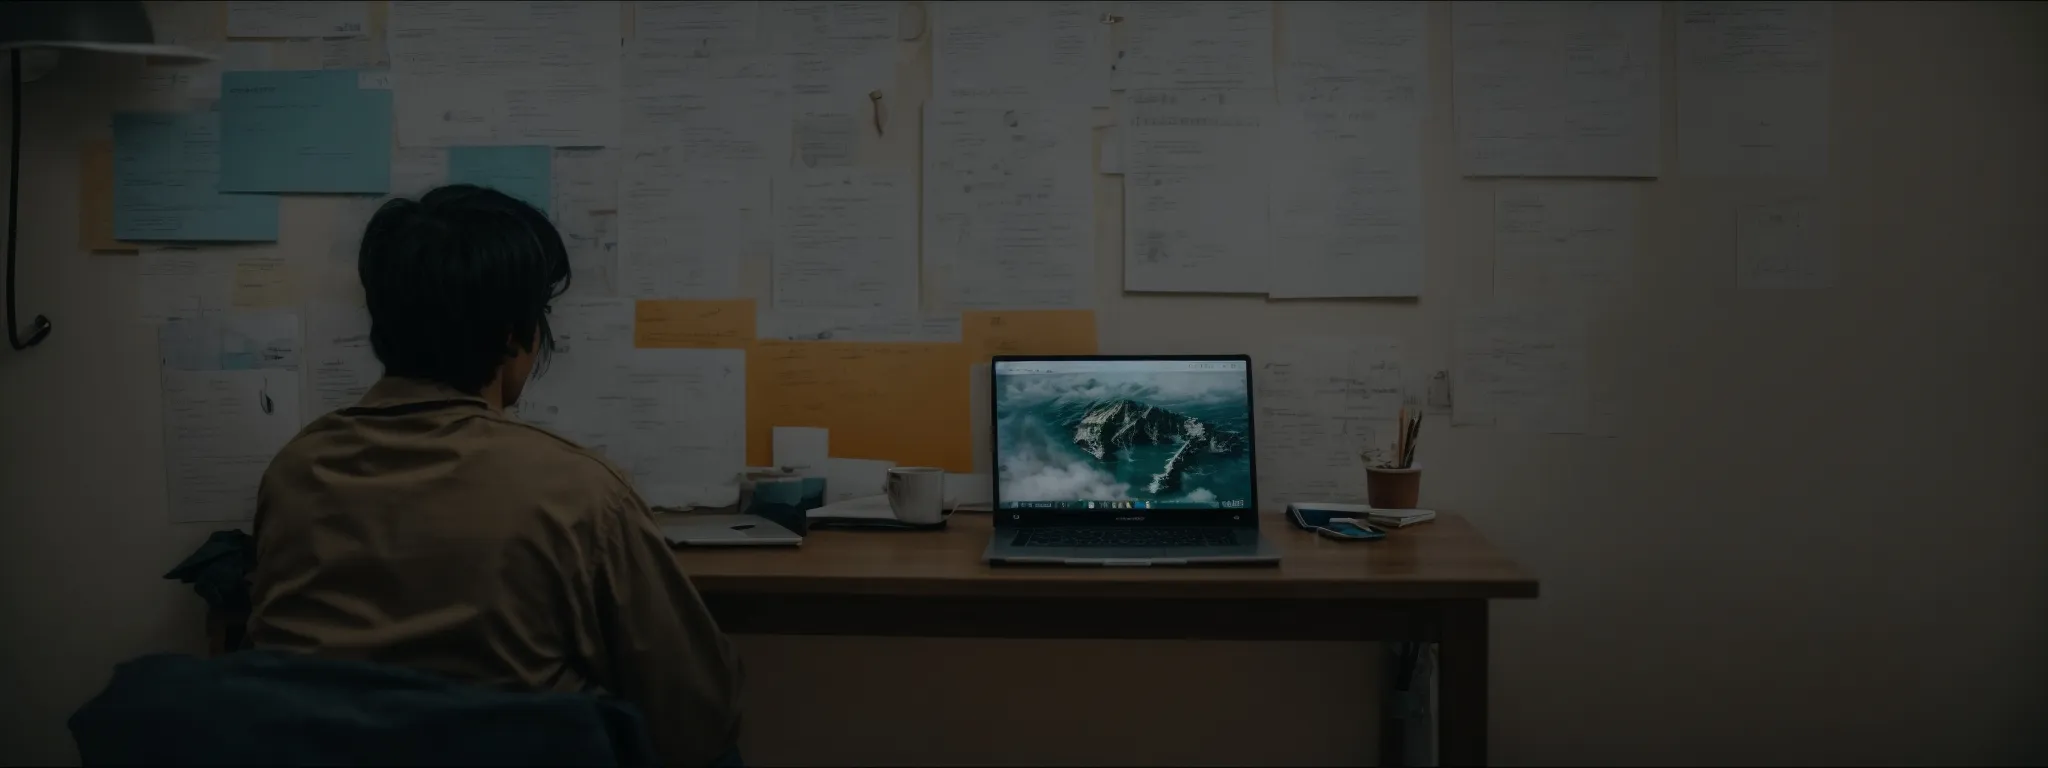 a person sitting with a laptop in front of a sprawling idea board, actively researching.